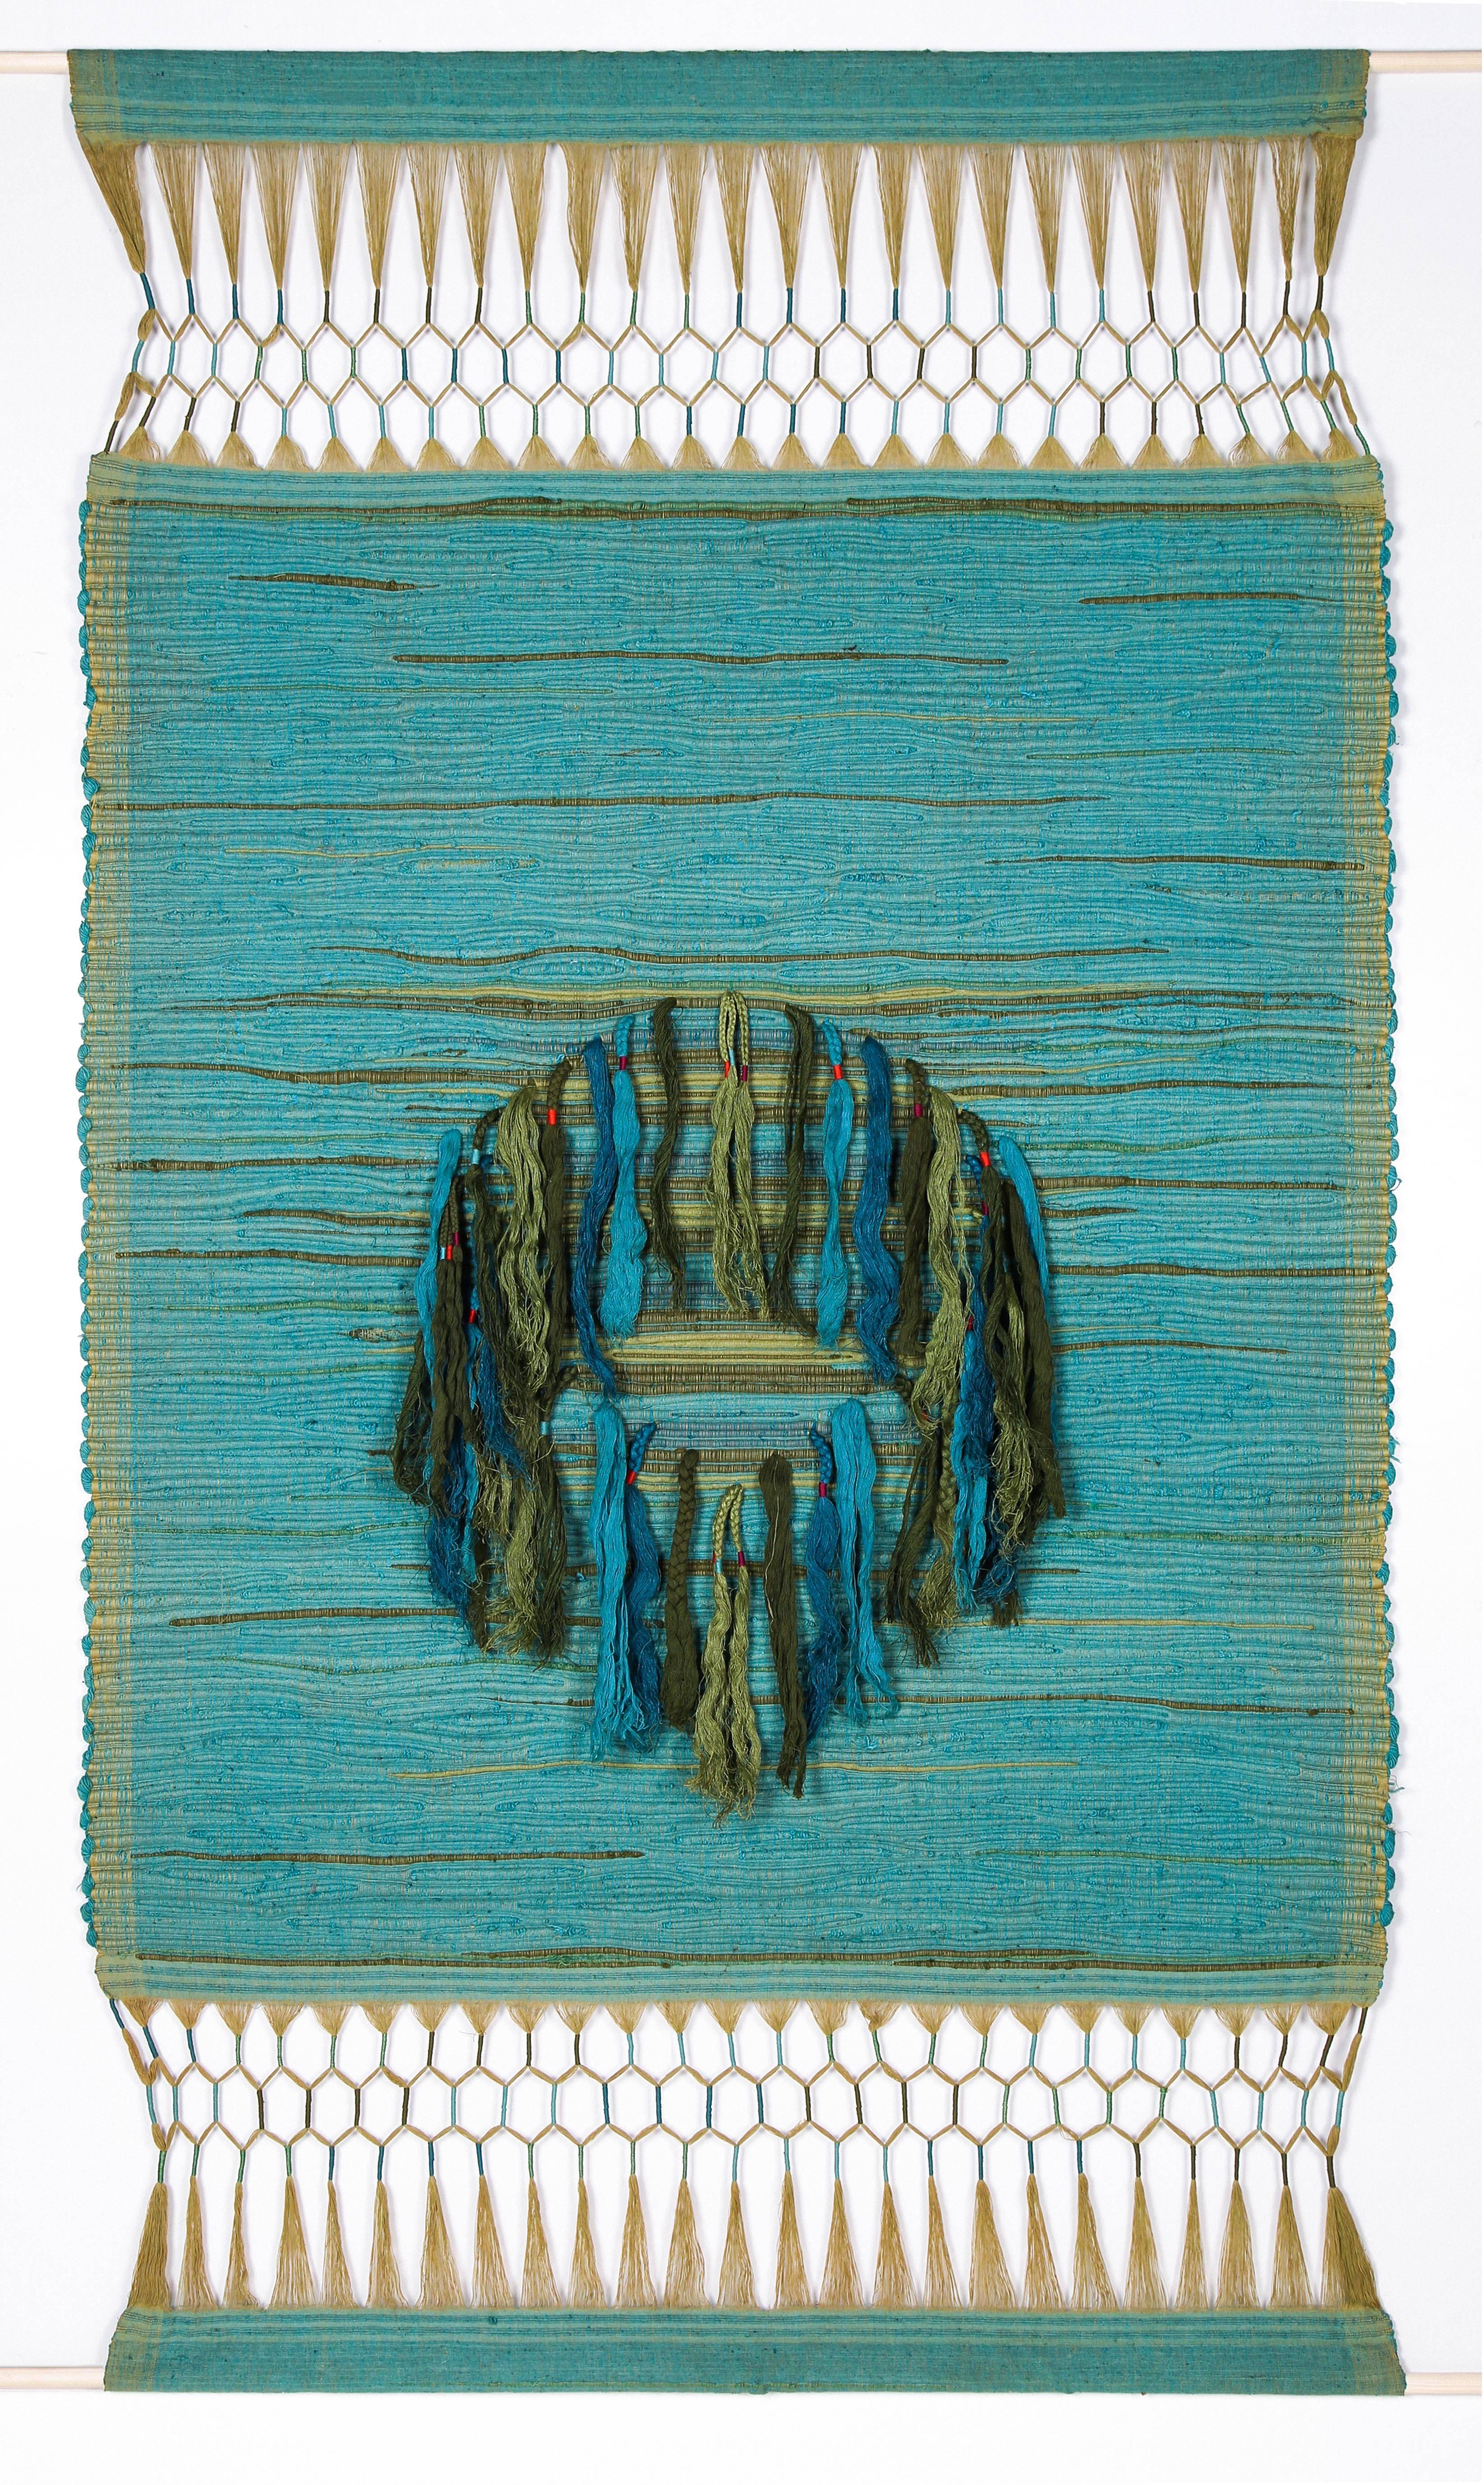 Sheila Hicks, Palghat Tapestry, India, 1966 1